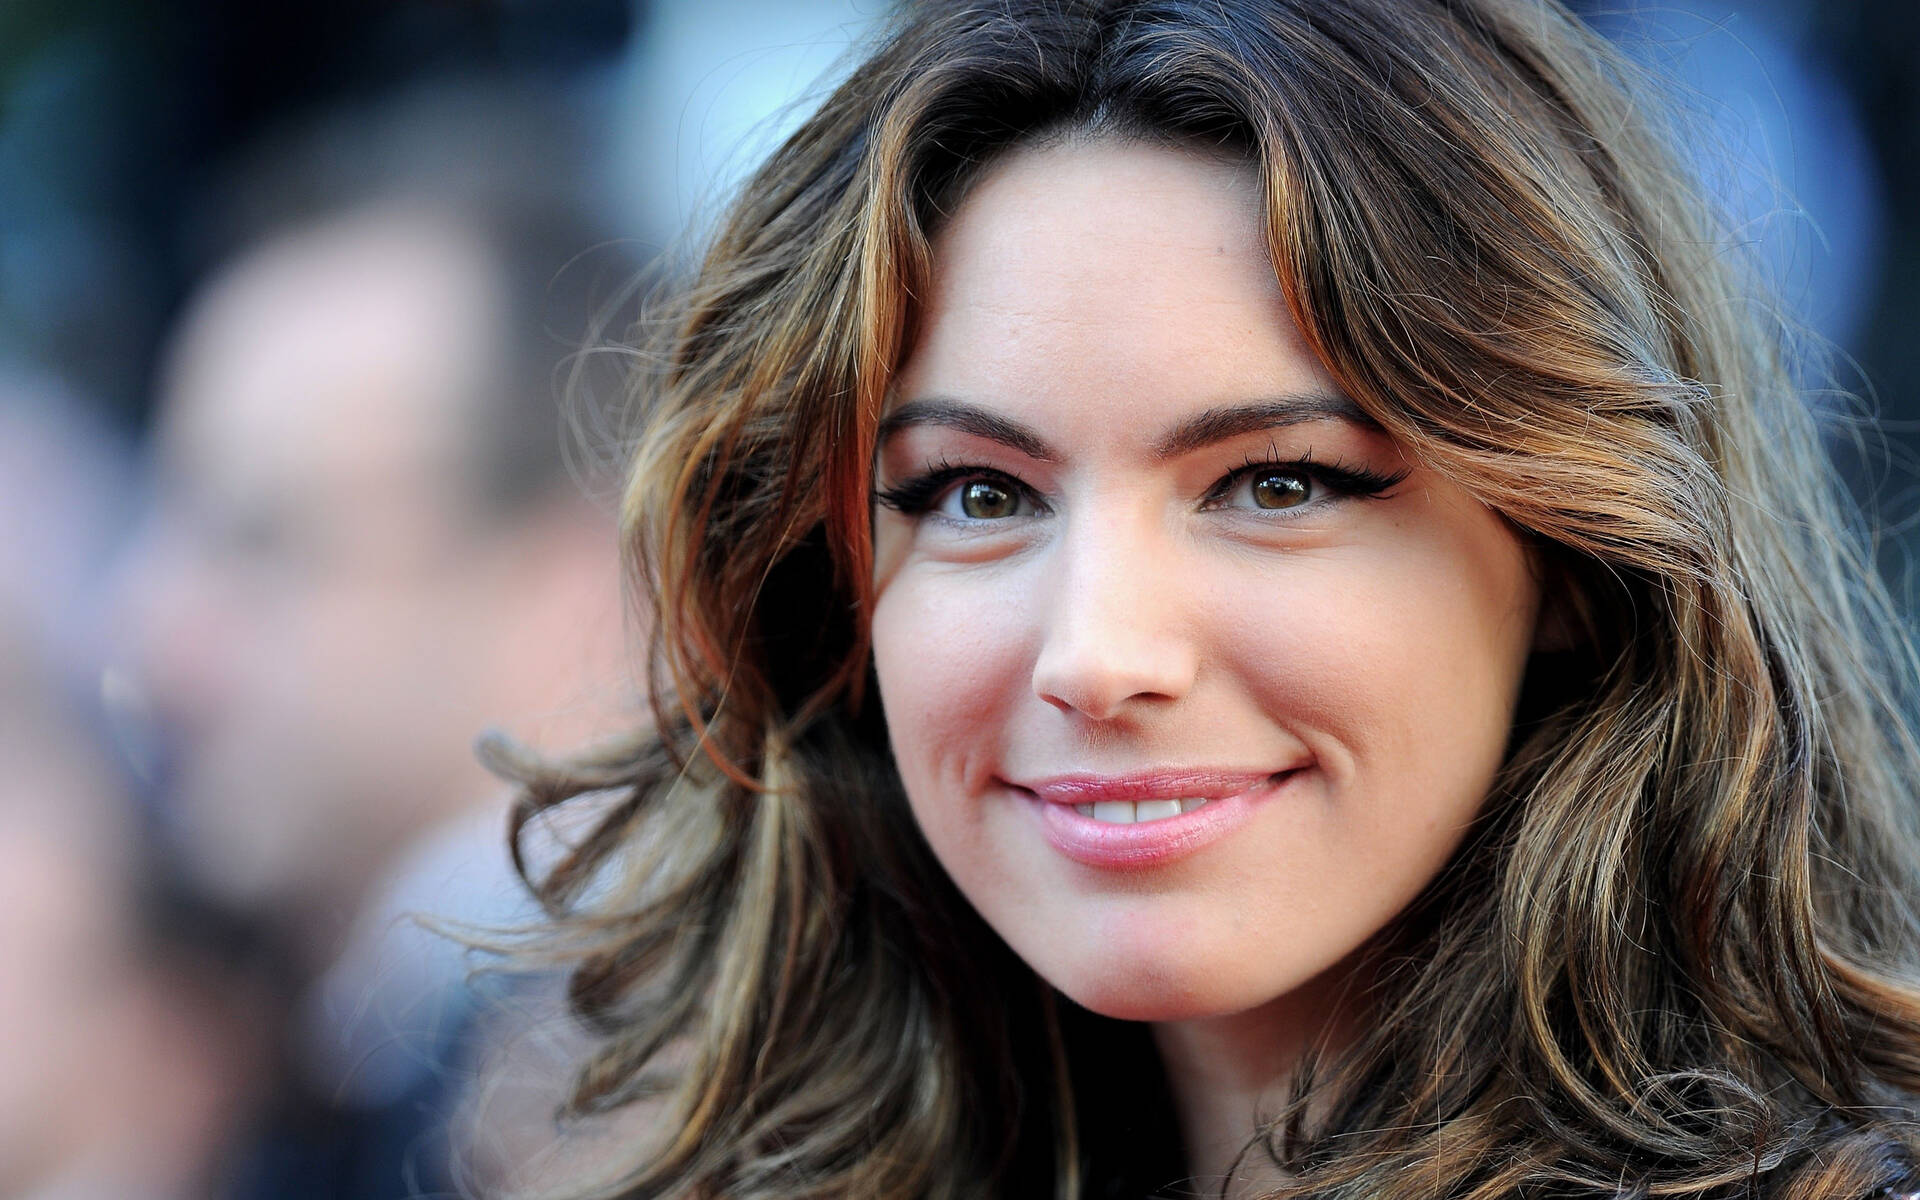 15 Extraordinary Facts About Kelly Brook - Facts.net